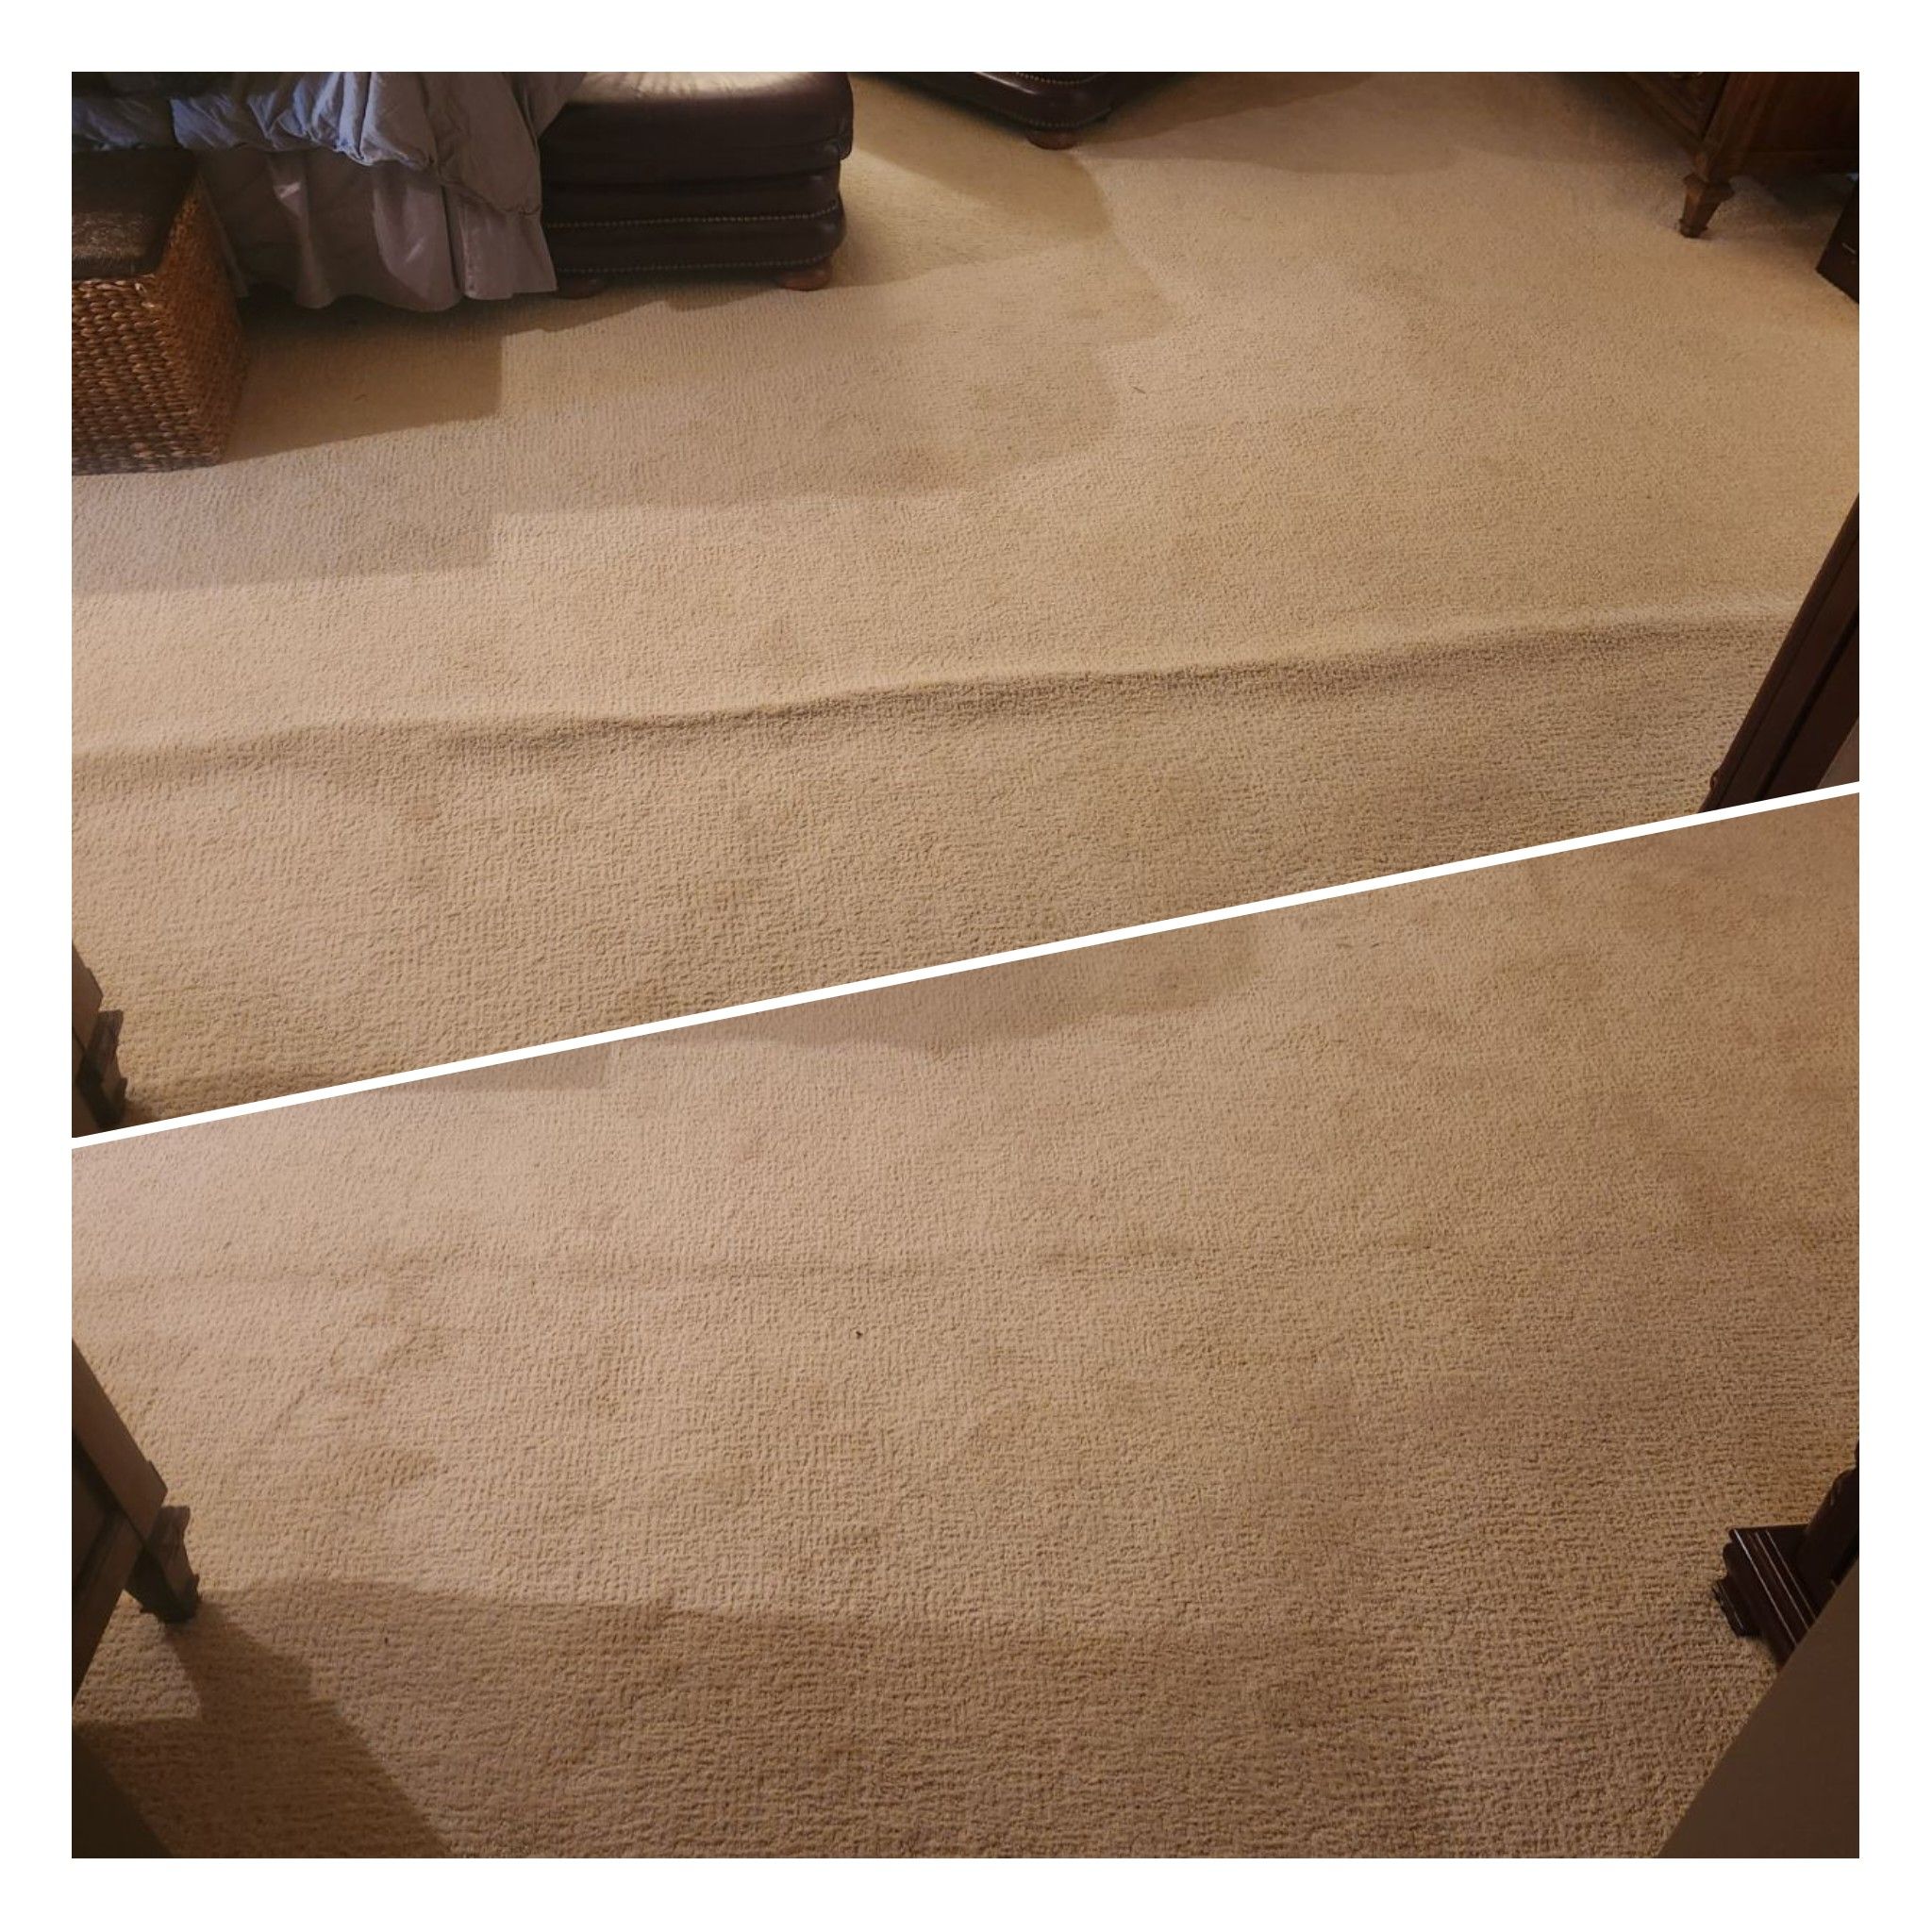 Carpet Restretching for Cut a Rug Flooring Installation in Lake Orion, MI